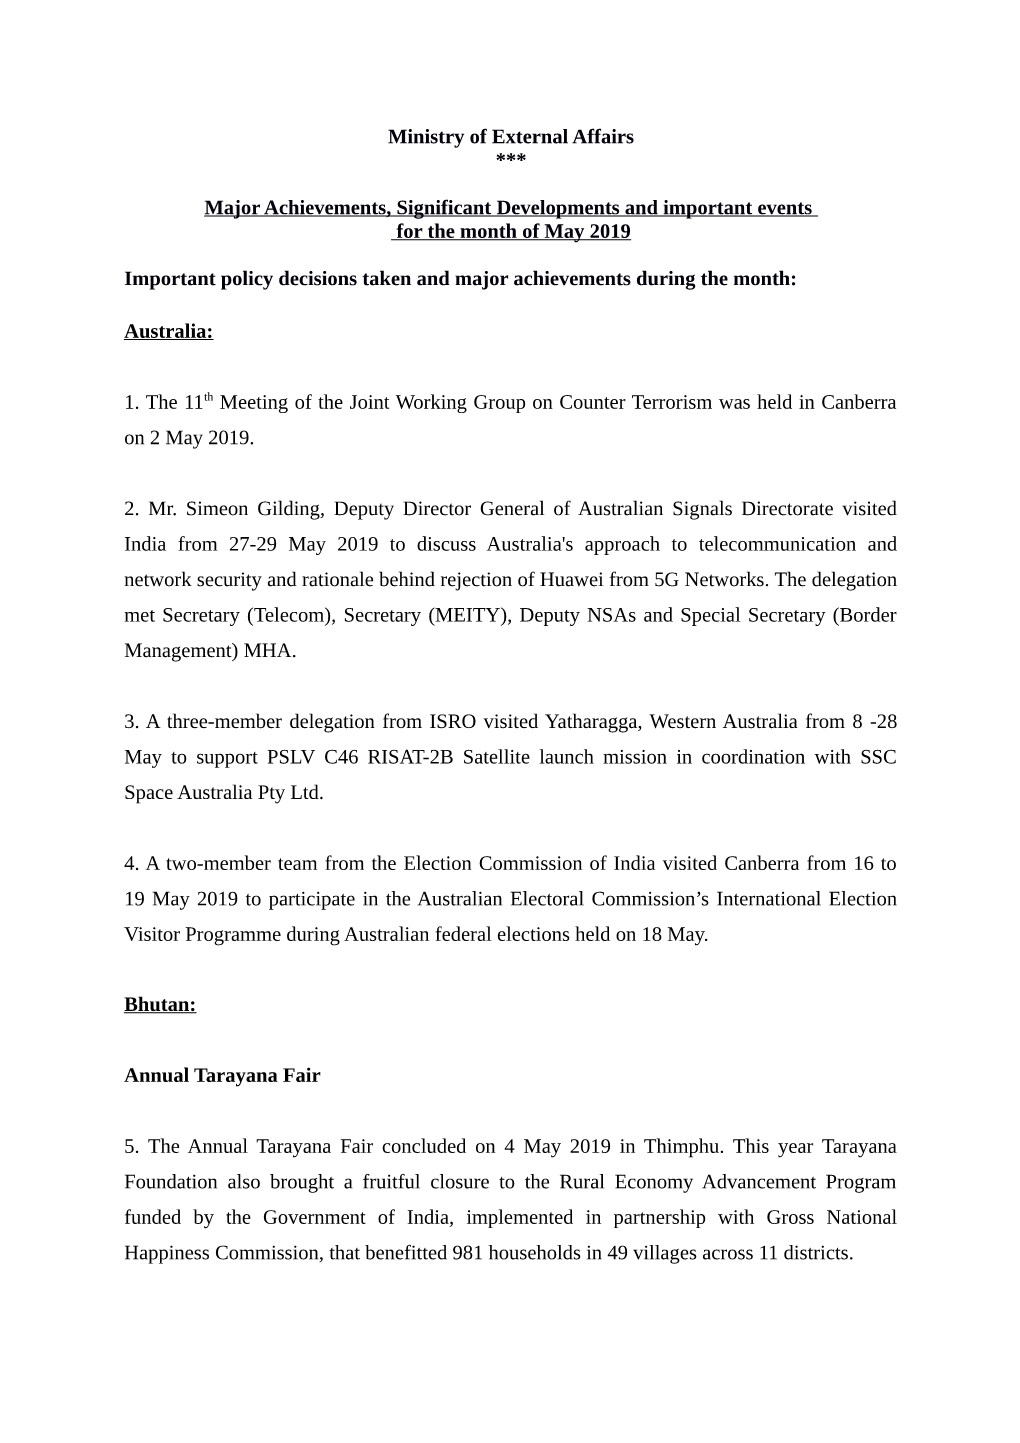 Ministry of External Affairs *** Major Achievements, Significant Developments and Important Events for the Month of May 2019